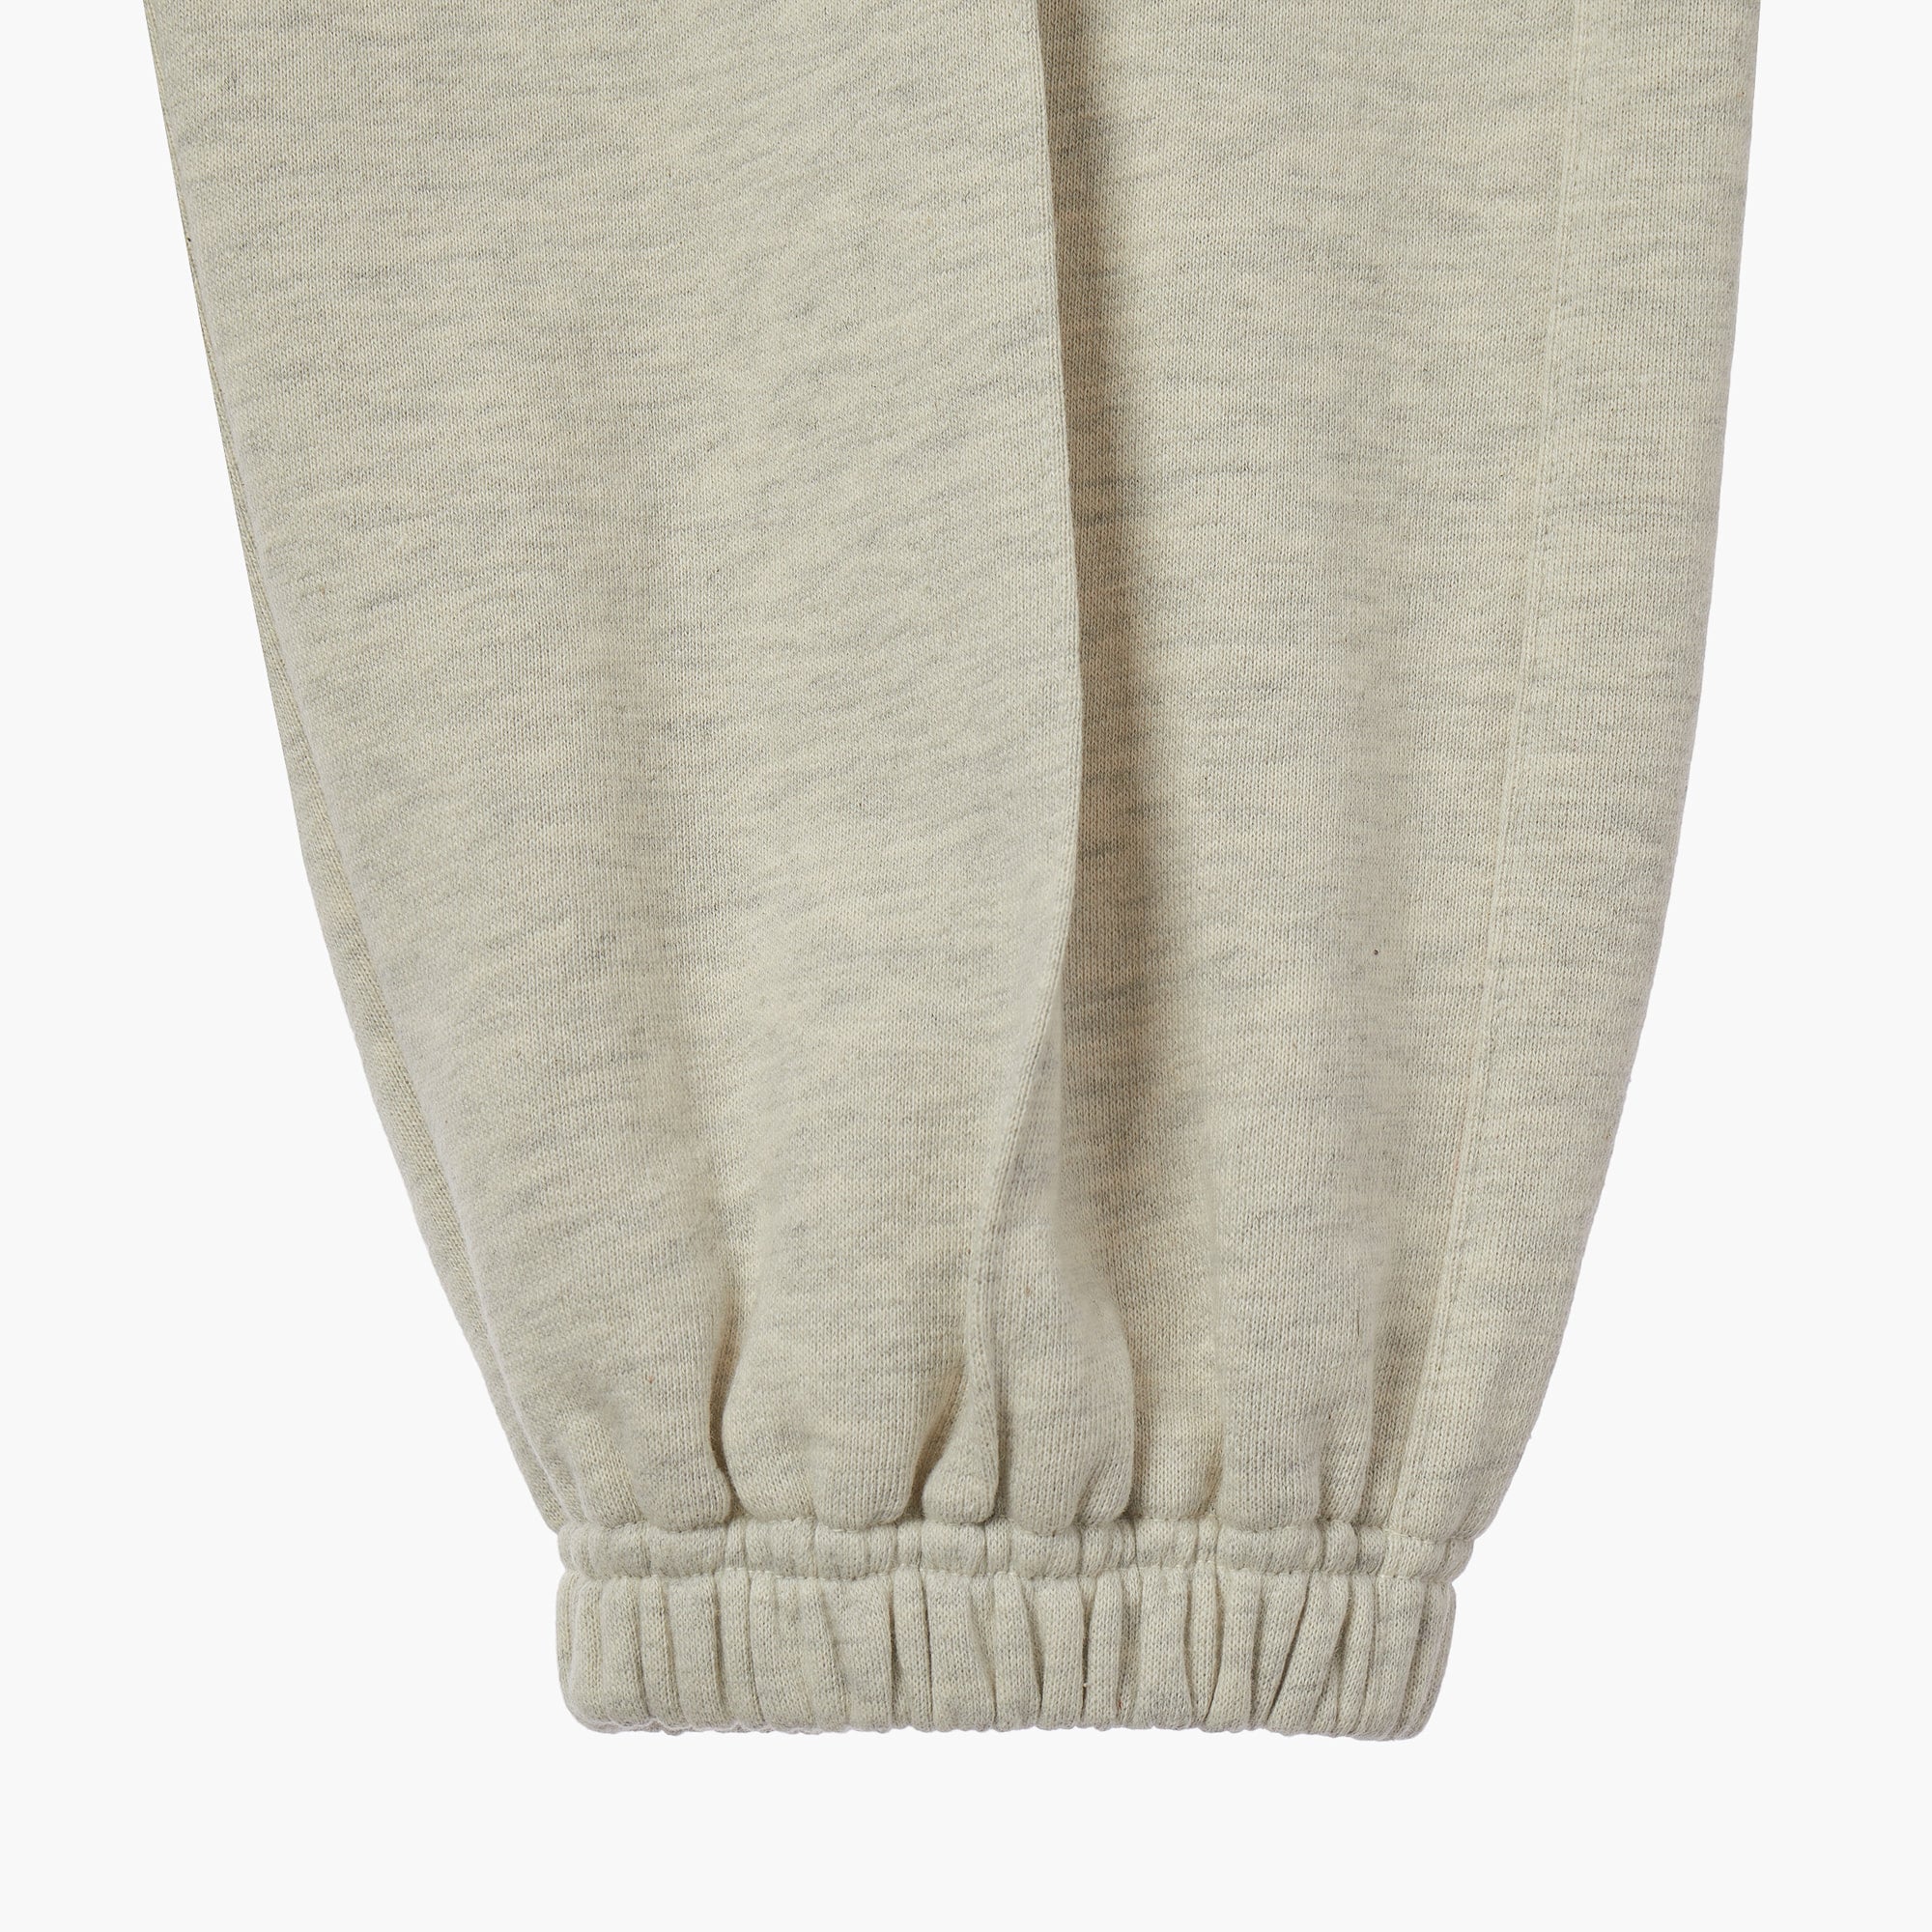 (MEN) RELAXED FIT JOGGERS - LINGER GALLERY